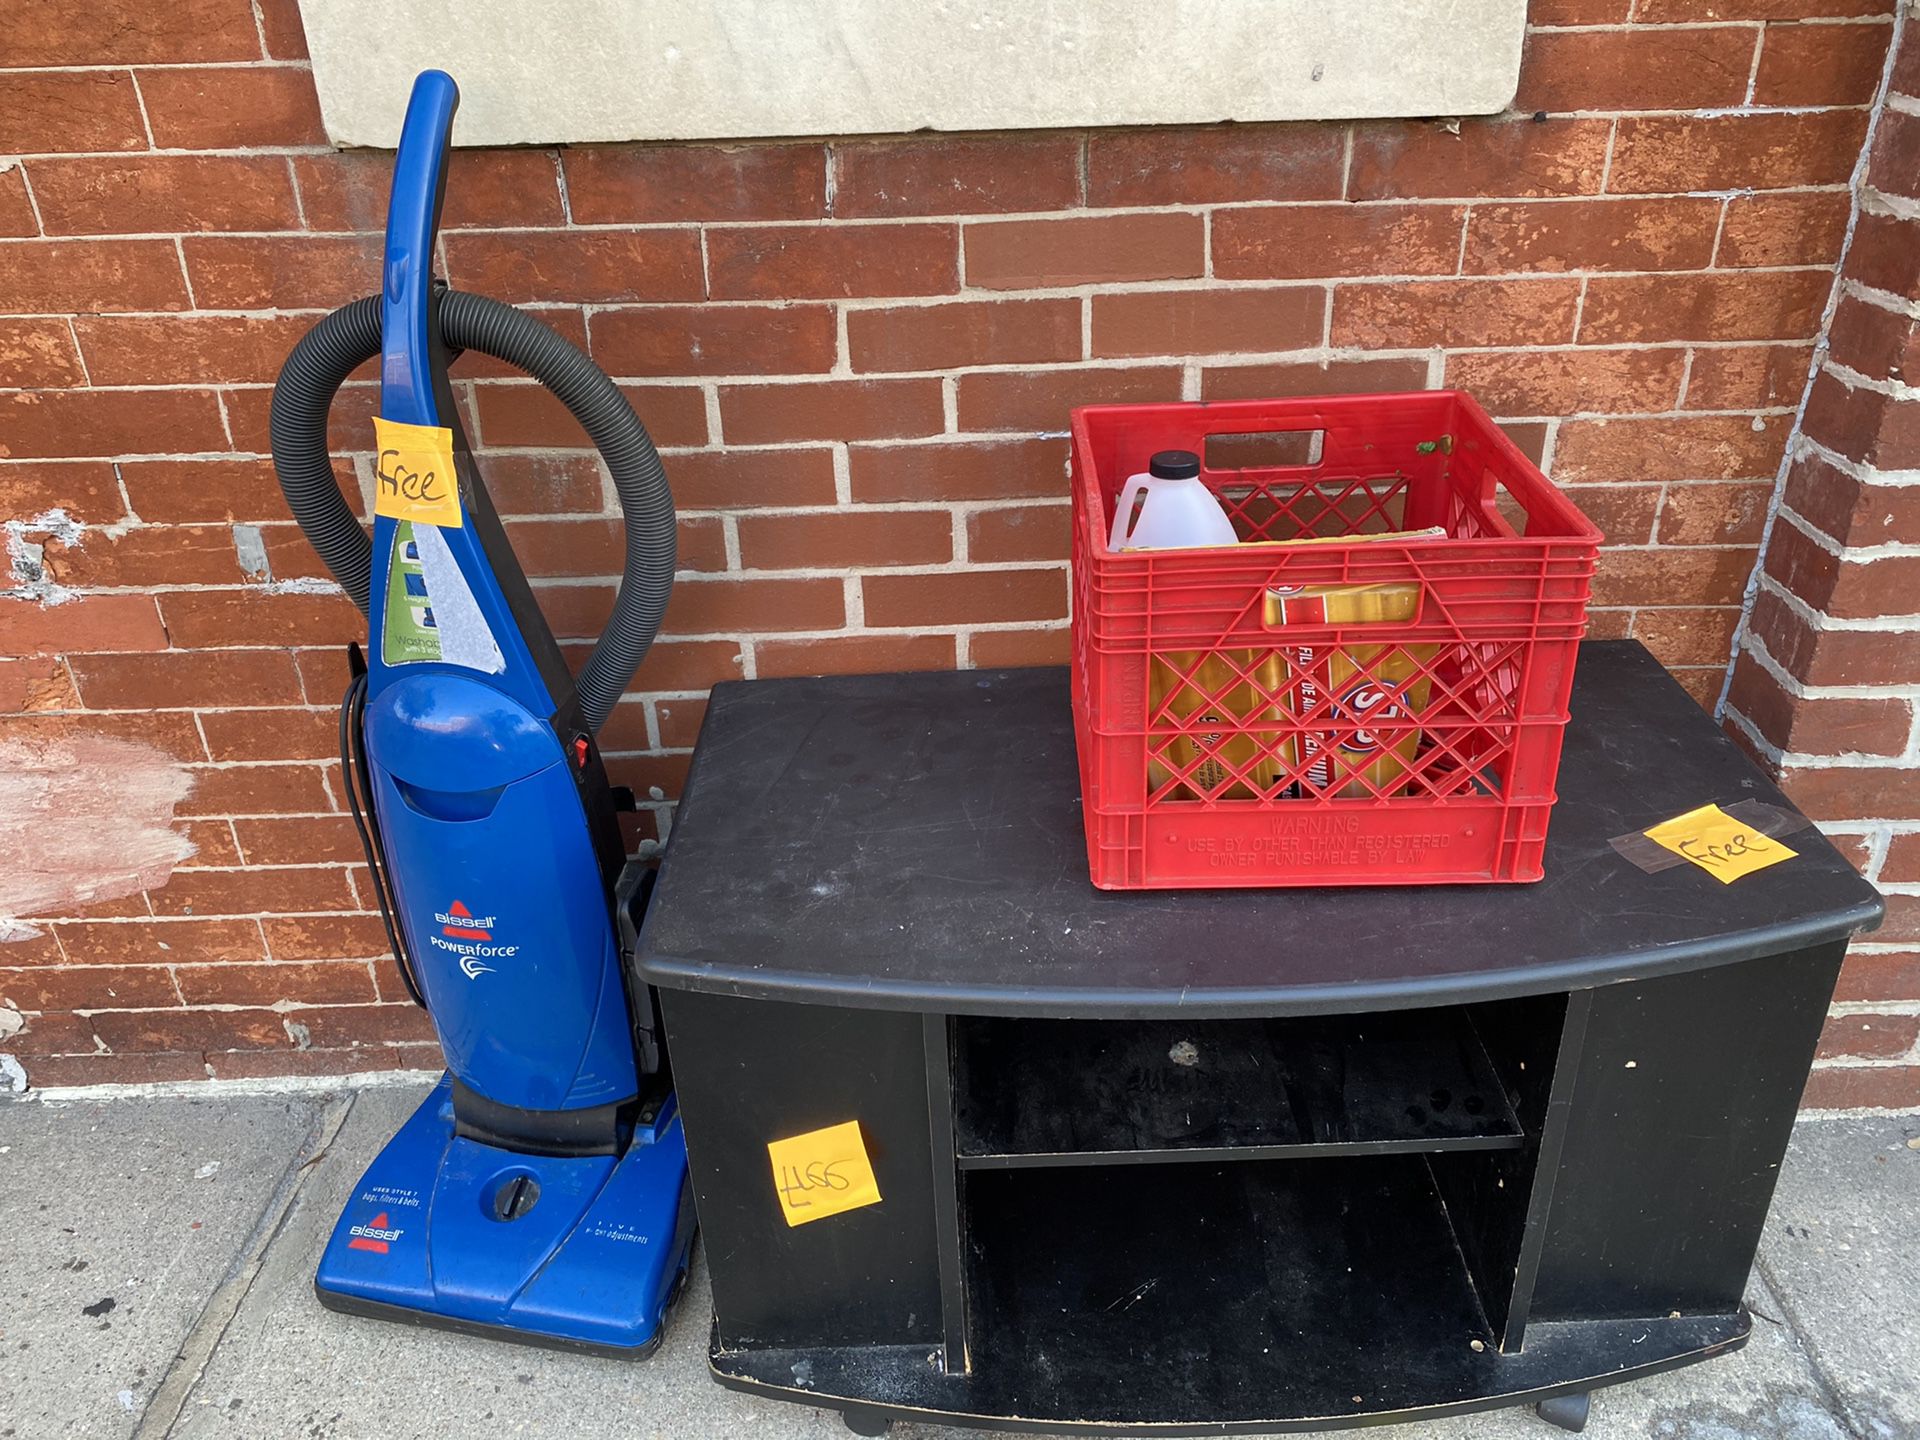 Free tv stand,tide pods and vaccum